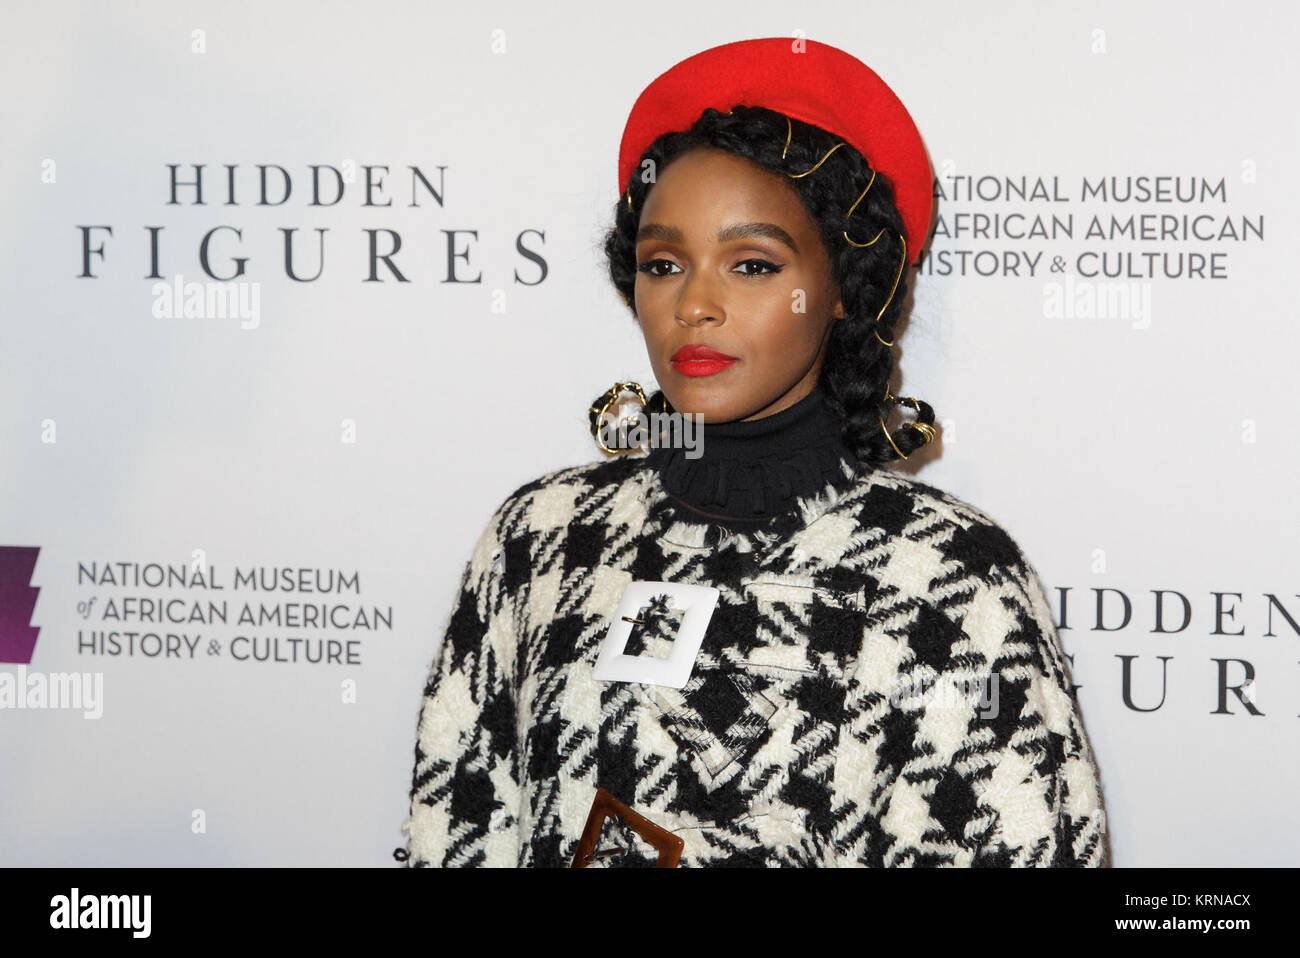 American musical recording artist, actress, and model Janelle Monáe arrives on the red carpet for a screening of the film “Hidden Figures” at the Smithsonian’s National Museum of African American History and Culture, Wednesday, Dec. 14, 2016 in Washington DC. The film is based on the book of the same title, by Margot Lee Shetterly, and chronicles the lives of Katherine Johnson, Dorothy Vaughan and Mary Jackson -- African-American women working at NASA as “human computers,” who were critical to the success of John Glenn’s Friendship 7 mission in 1962. Photo Credit: (NASA/Joel Kowsky) 22Hidden F Stock Photo